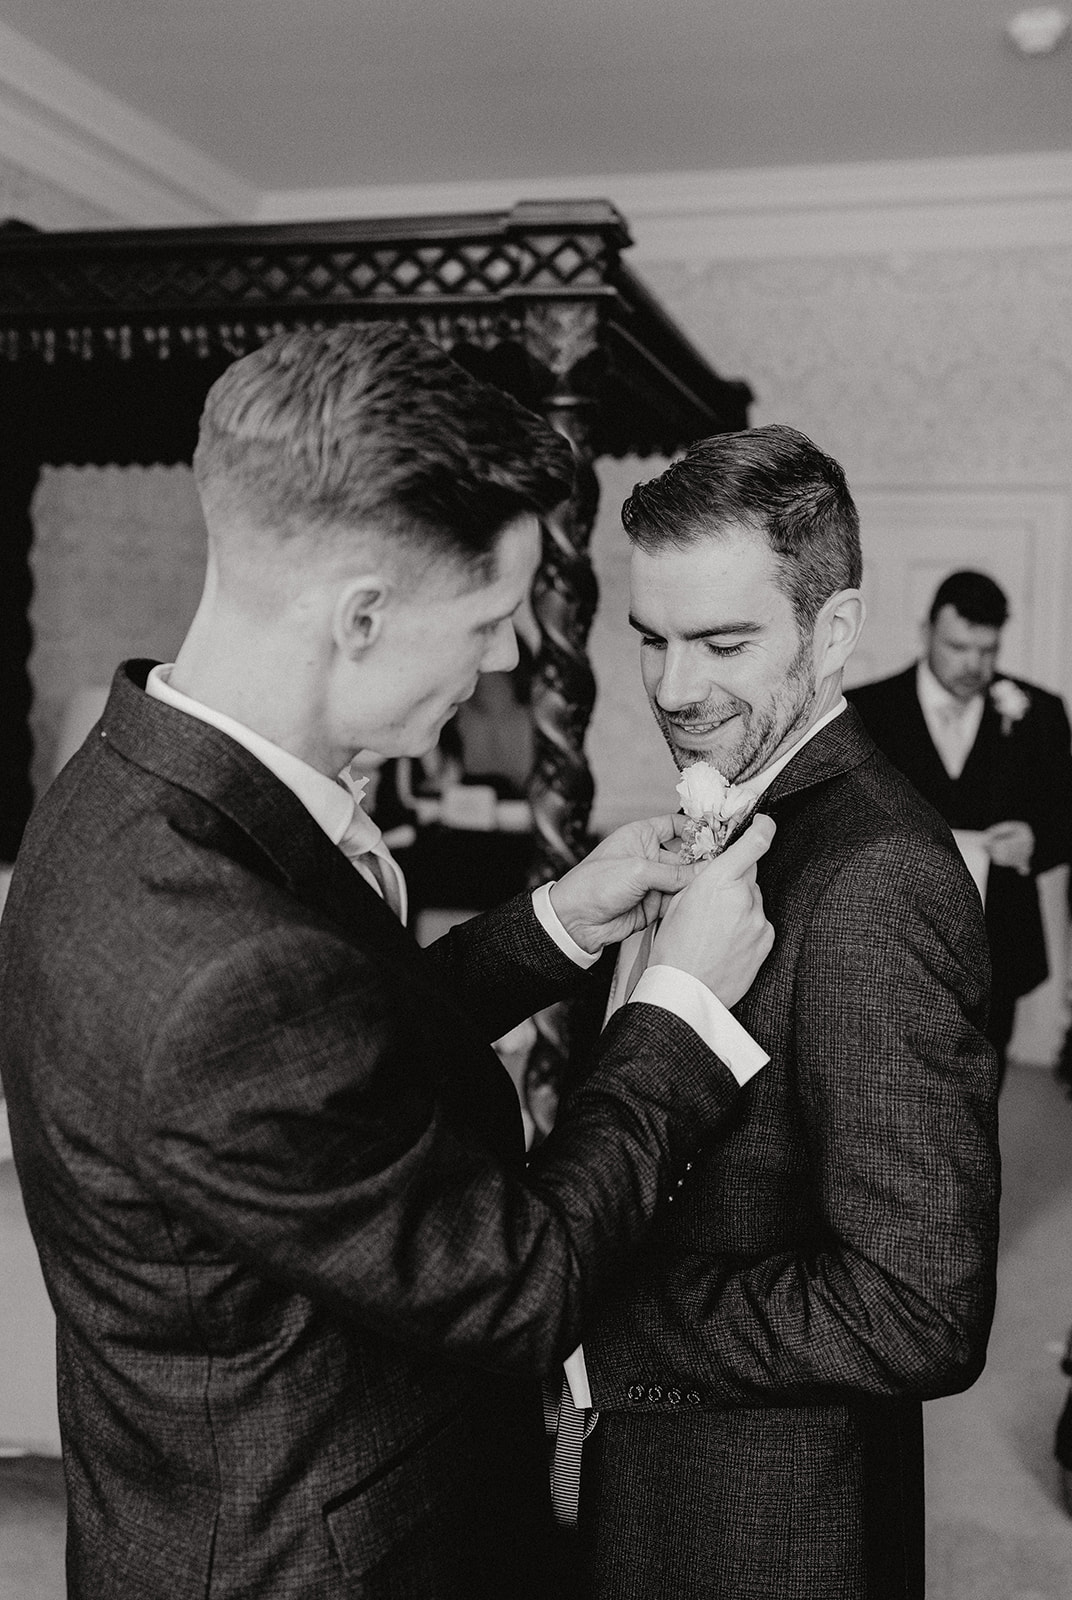 Groom having his button hole put on by best man